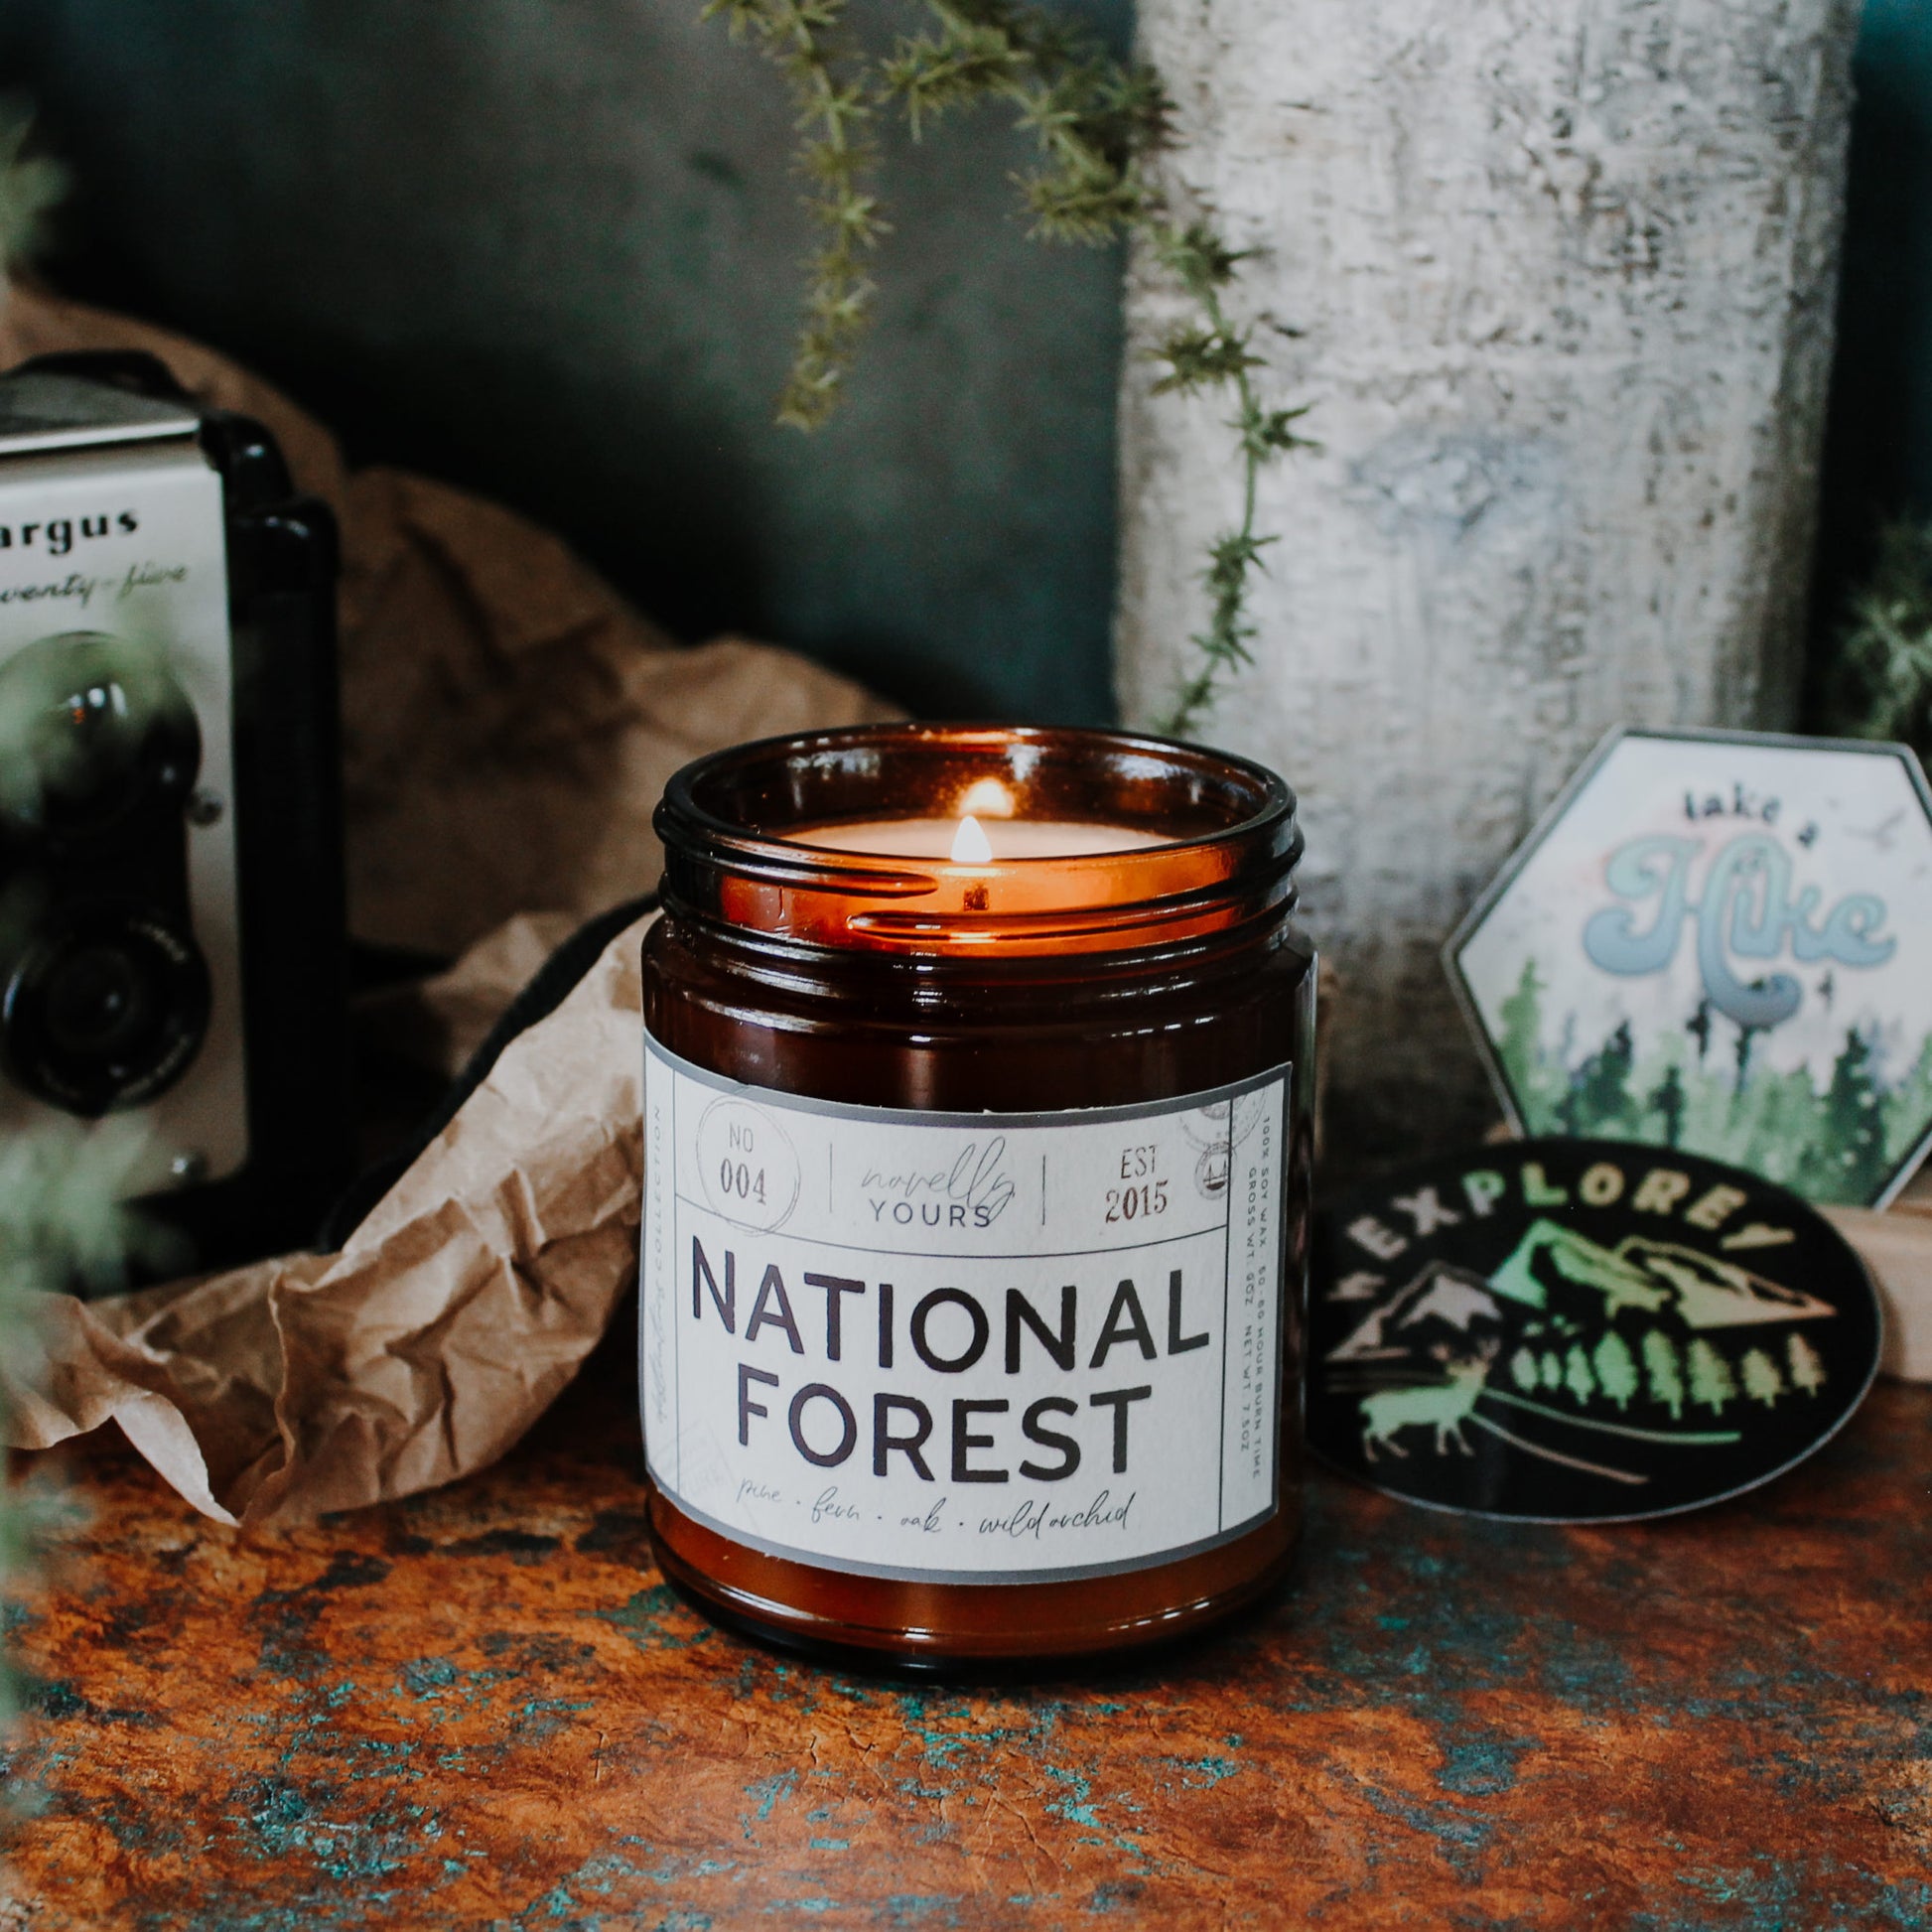 national forest scented soy wax candle in amber jar. candle is lit, sits on rustic surface surrounded by relevant decor